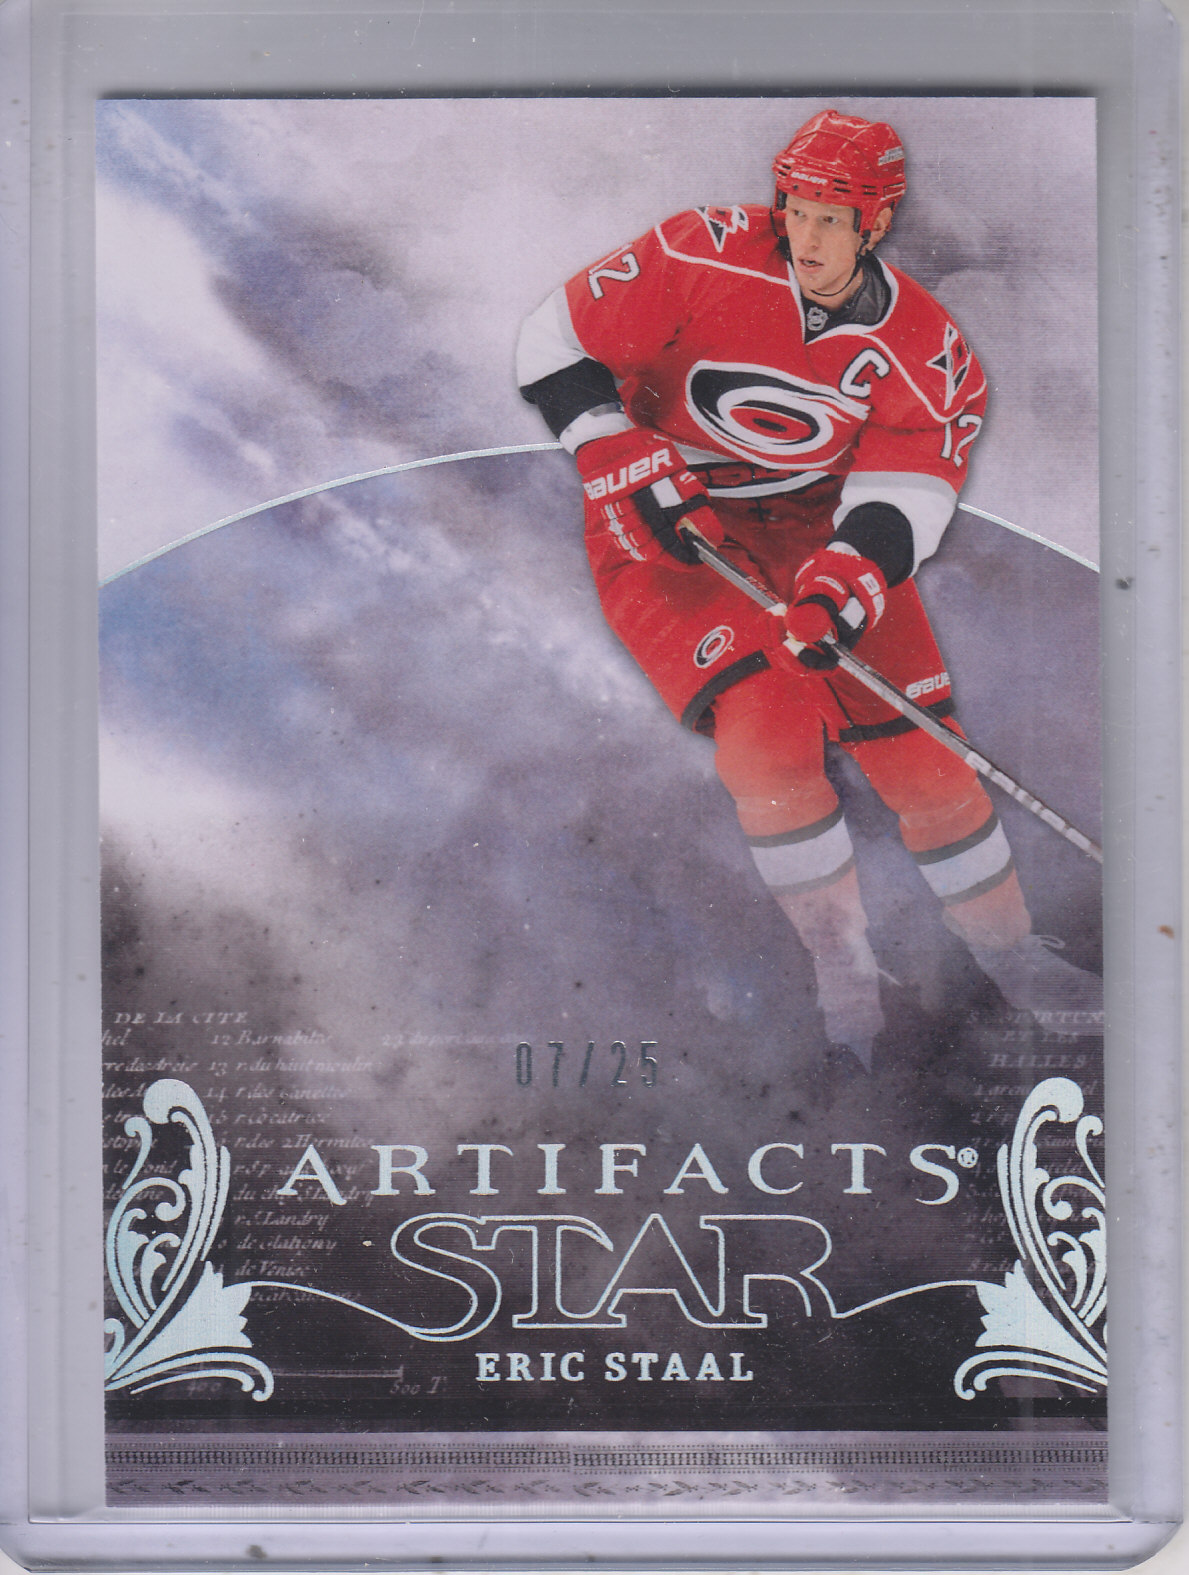 2010-11 Artifacts Silver #156 Eric Staal S